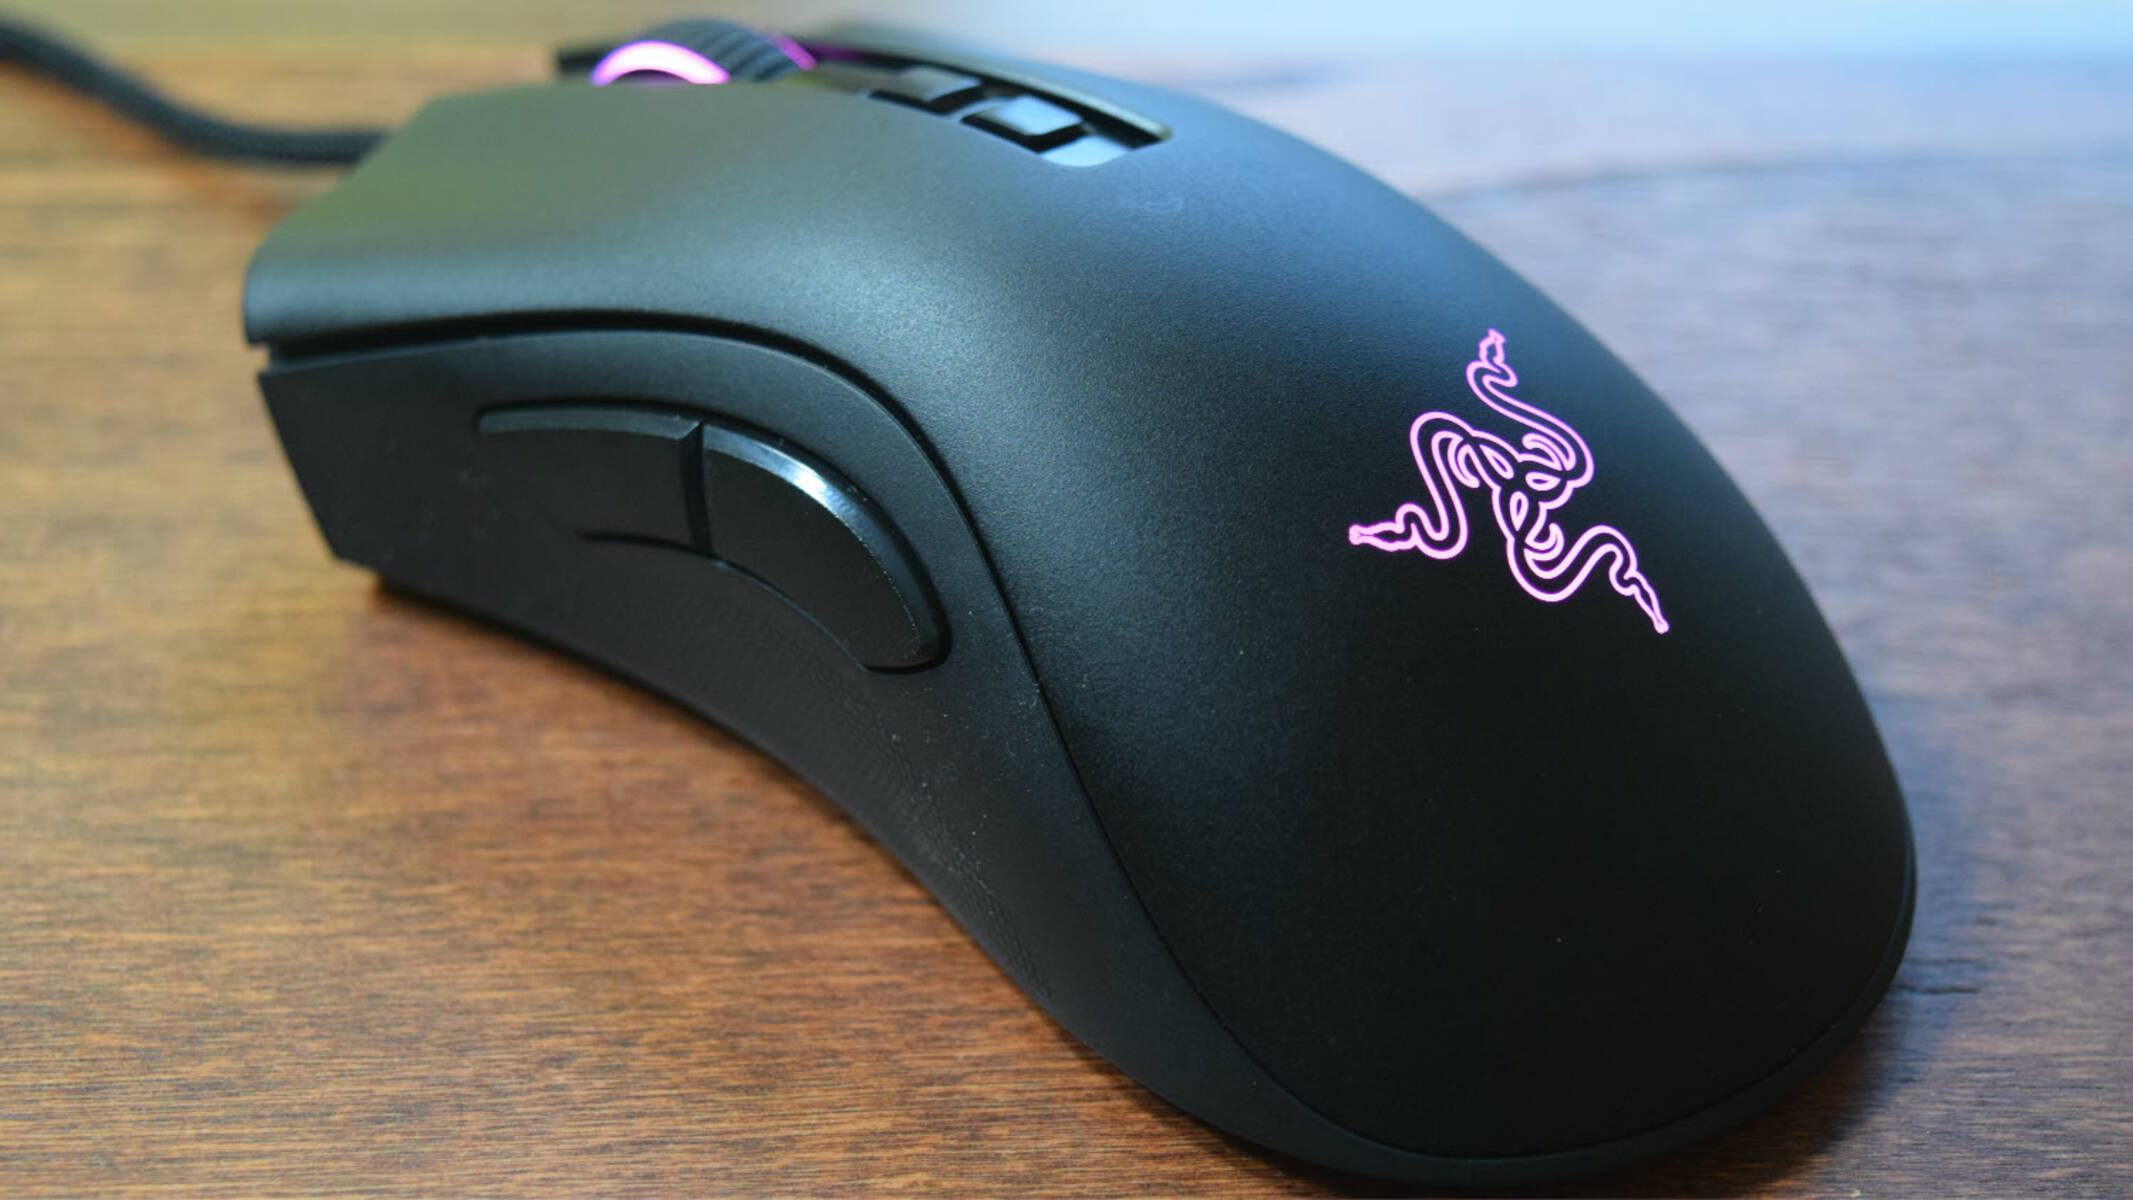 What Makes The Deathadder A Gaming Mouse